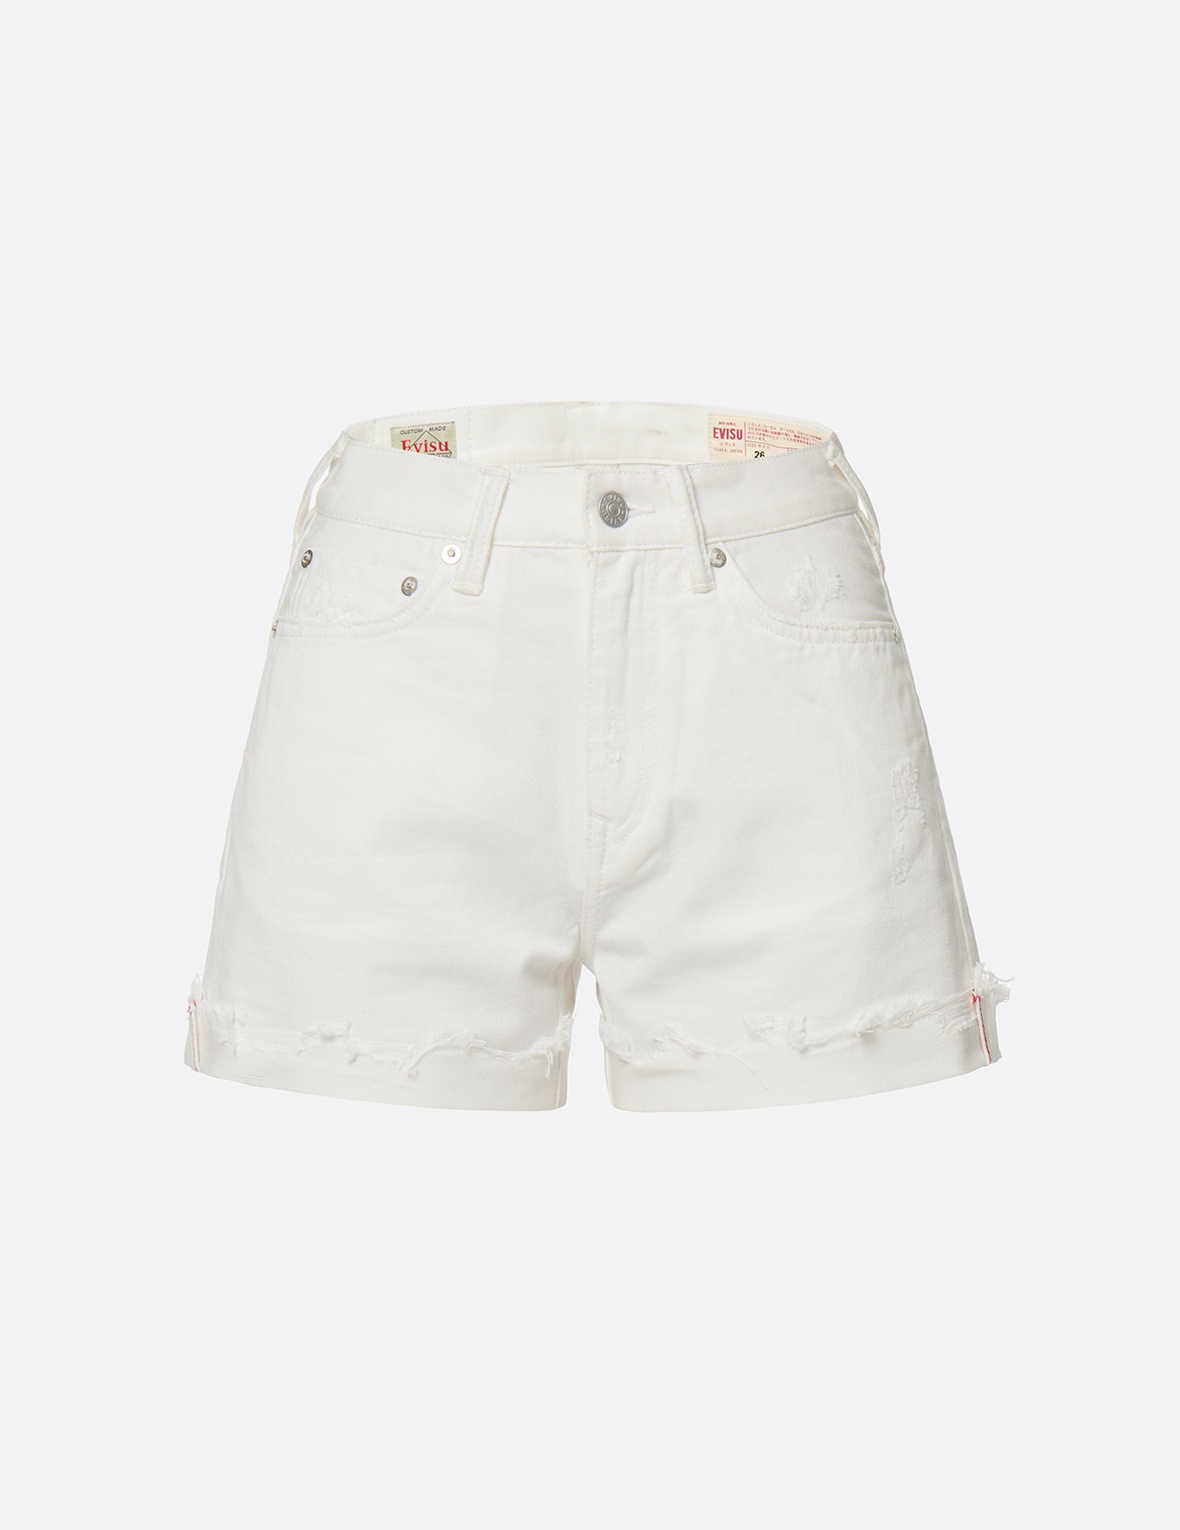 SEAGULL EMBROIDERY DENIM SHORTS - 2